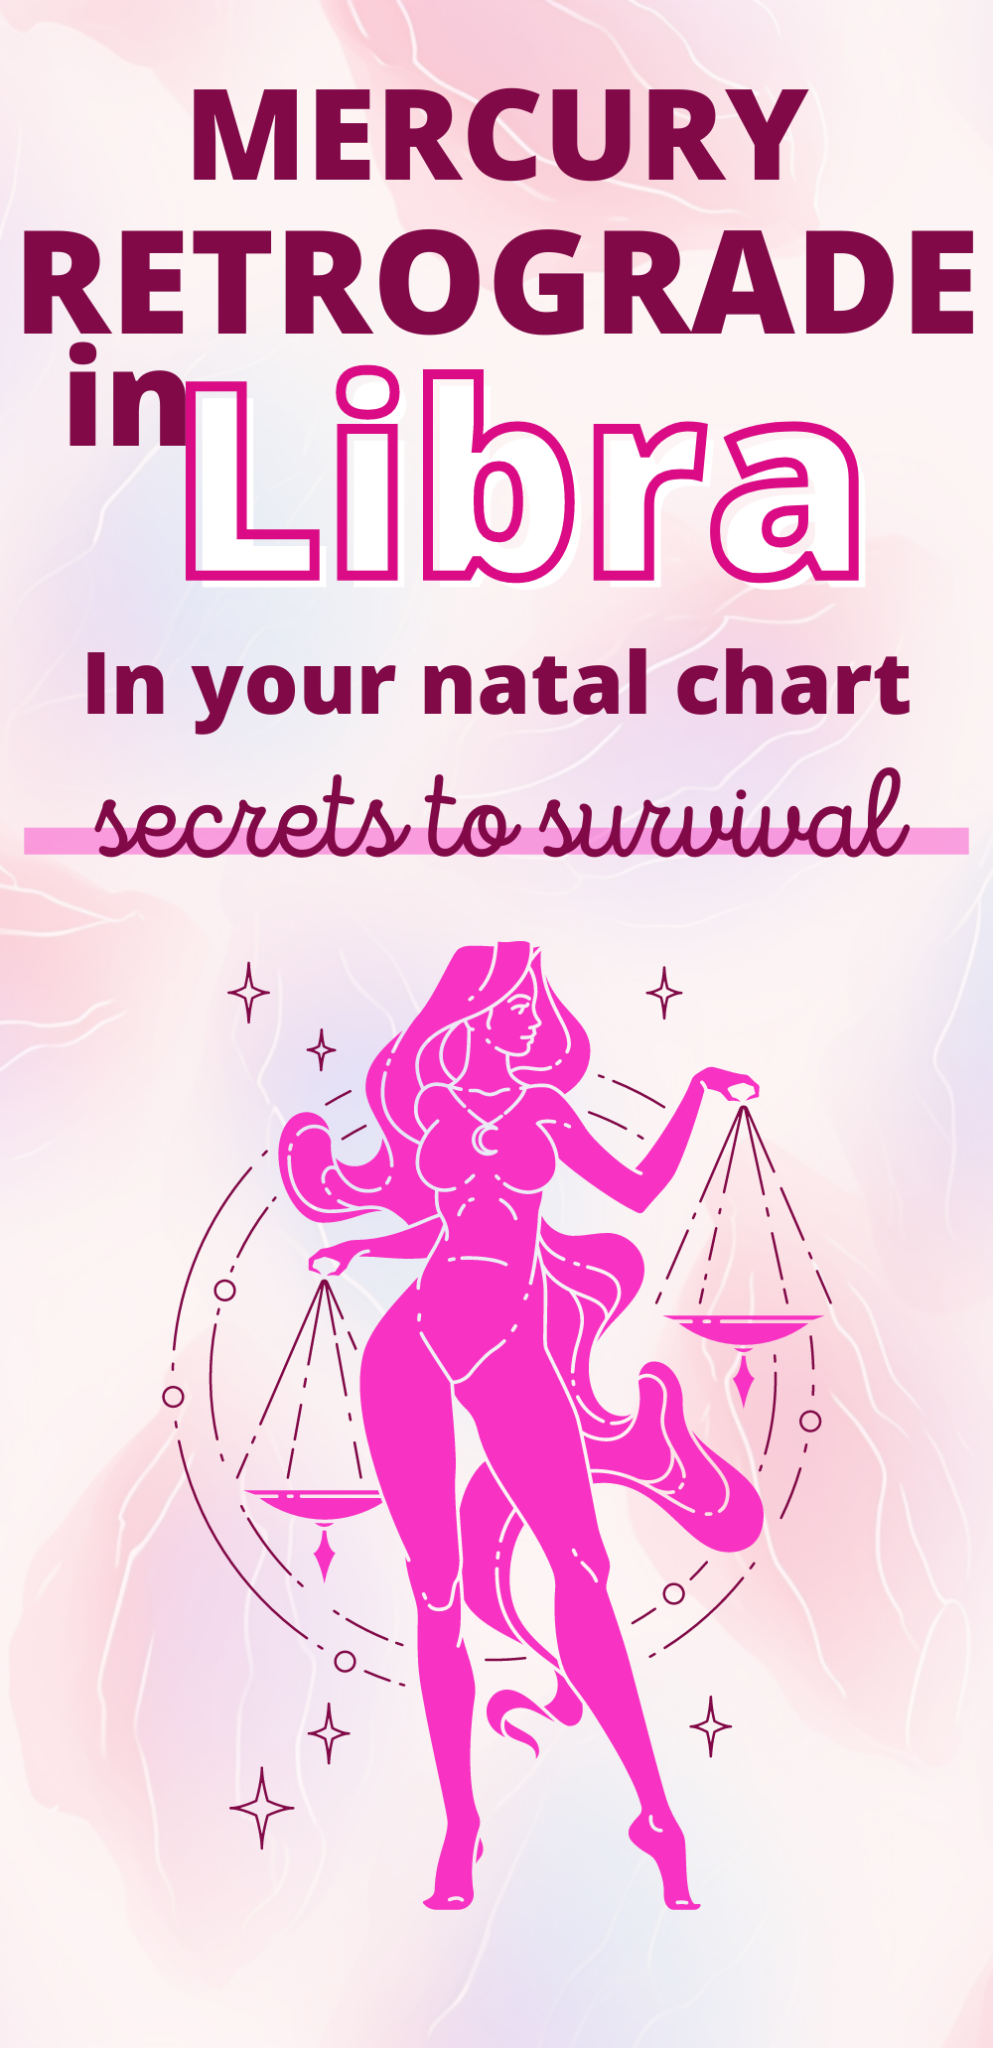 Mercury Retrograde In Libra In Your Natal Chart (How It Impacts You